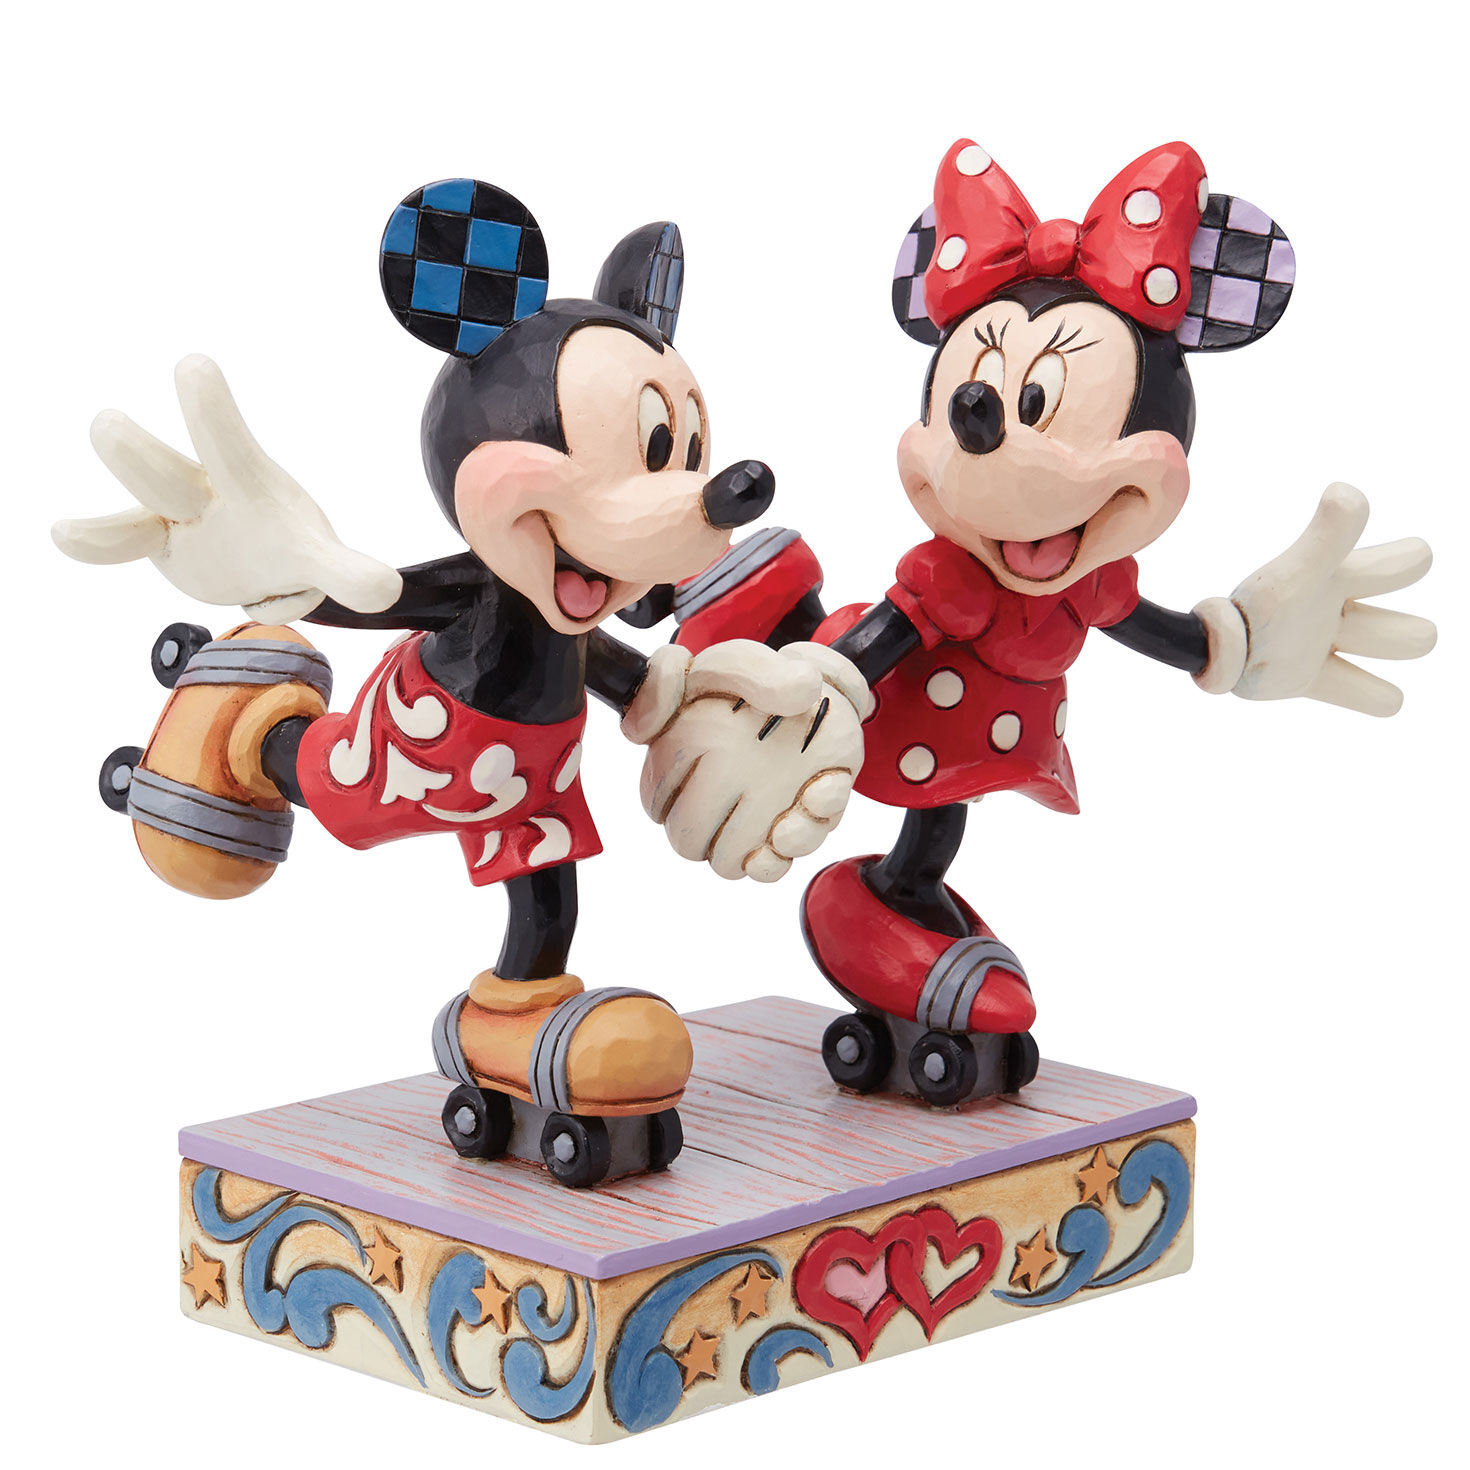 Jim Shore Disney Mickey and Minnie Roller Skating Figurine, 5.5" for only USD 69.99 | Hallmark